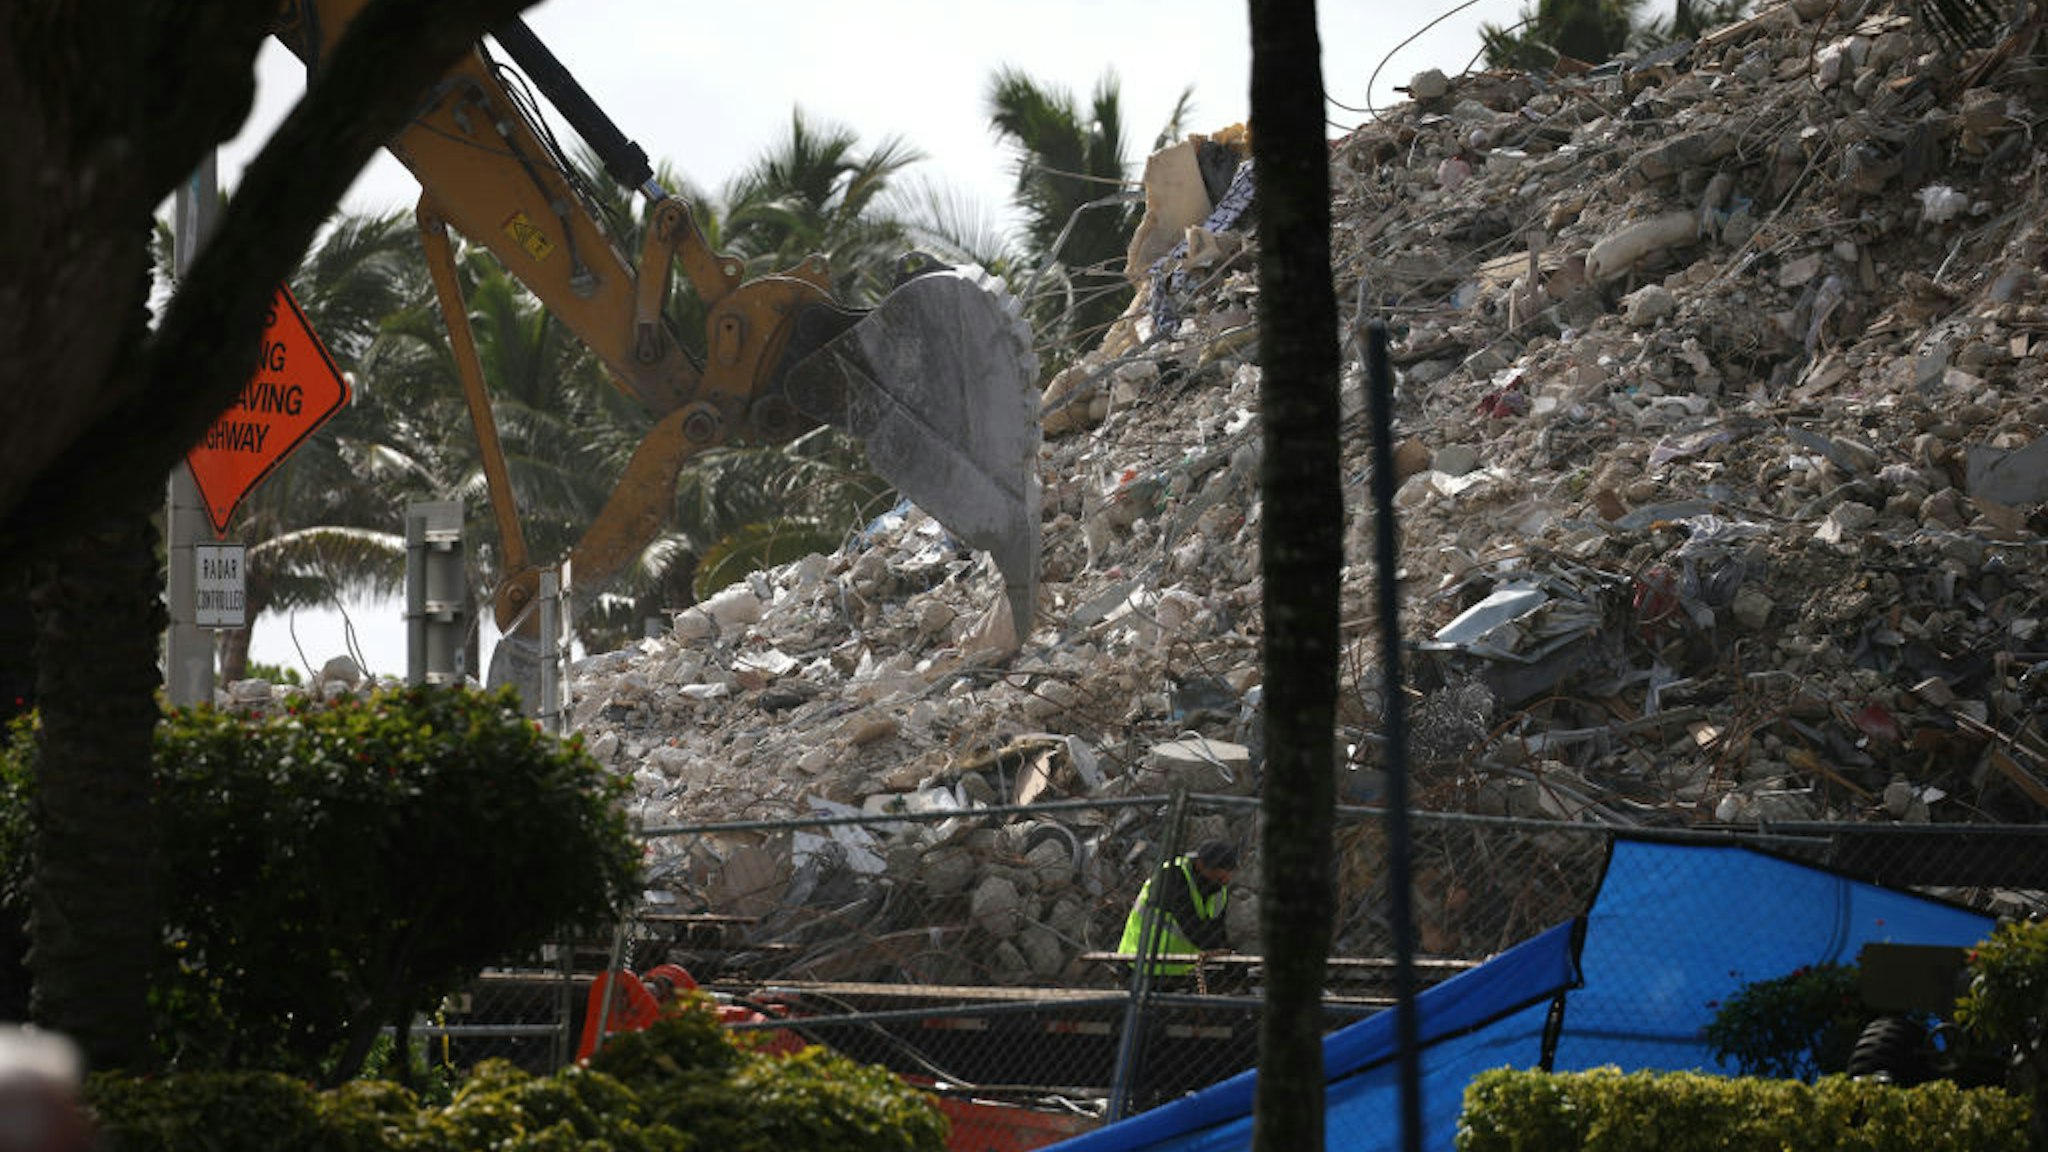 Excavators dig through the pile of debris from the collapsed 12-story Champlain Towers South condo building following a severe thunderstorm on July 13, 2021 in Surfside, Florida.